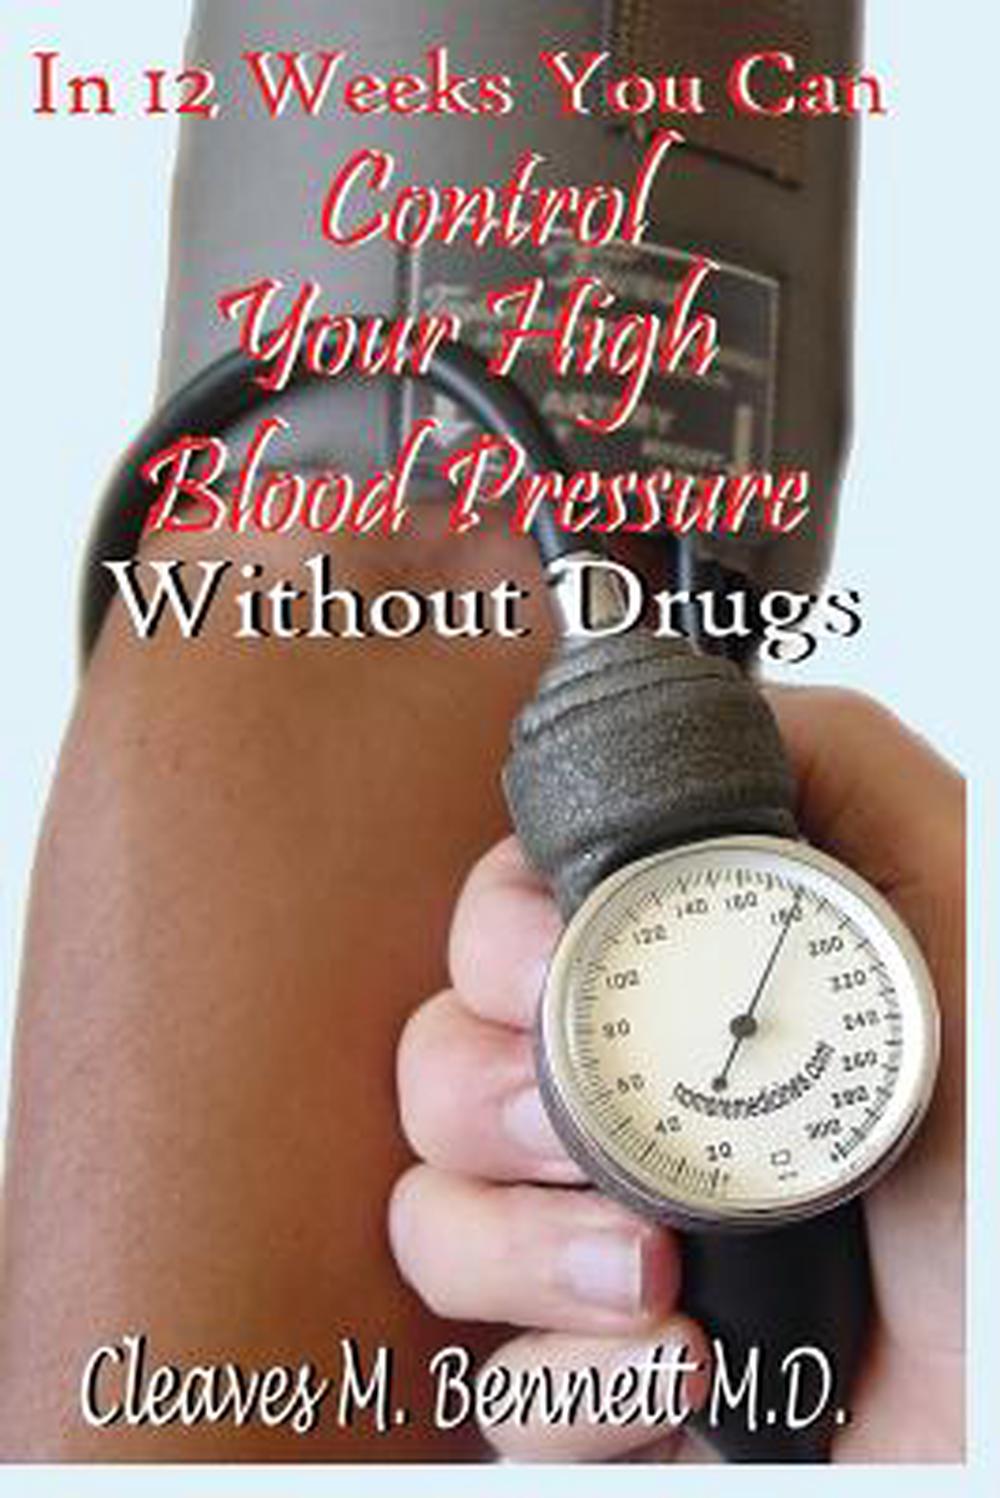 In 12 weeks You Can Control Your High Blood Pressure ...